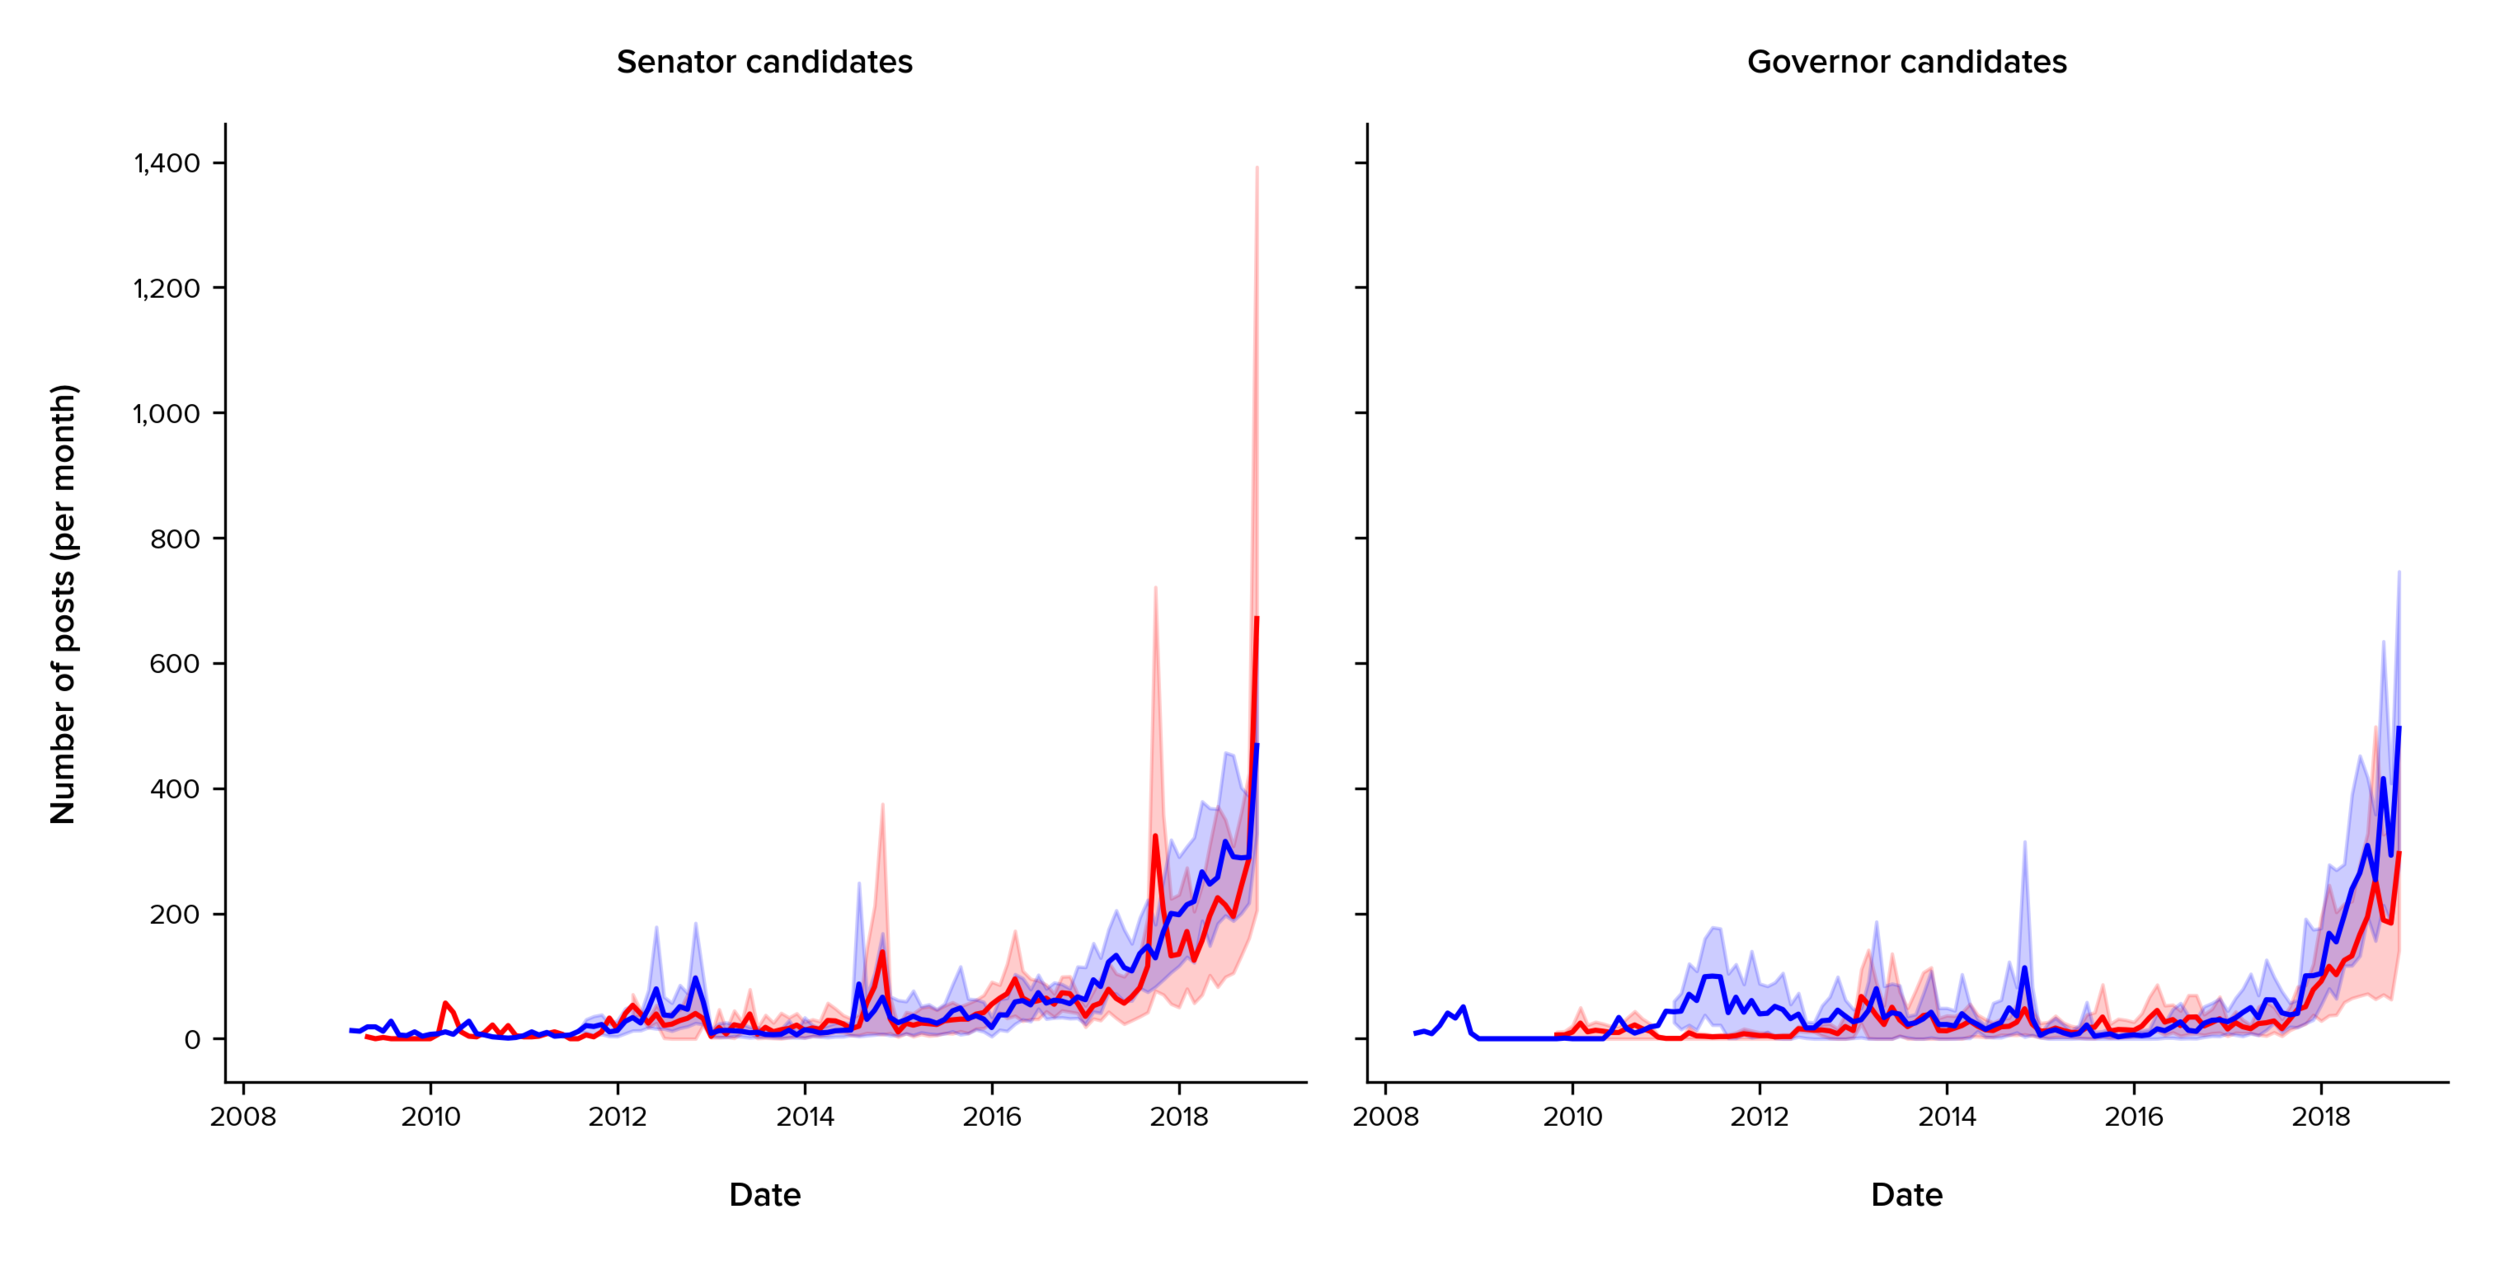  The average number of posts per month over the last decade, by position and by party. The graph on the left measures tweet volume for senatorial candidates; the graph on the right measures tweet volume over time for gubernatorial candidates. Blue and red lines measure the average number of posts across candidates in our sample; blue and red flares show the lower and upper bounds of posts from candidates in each party. 